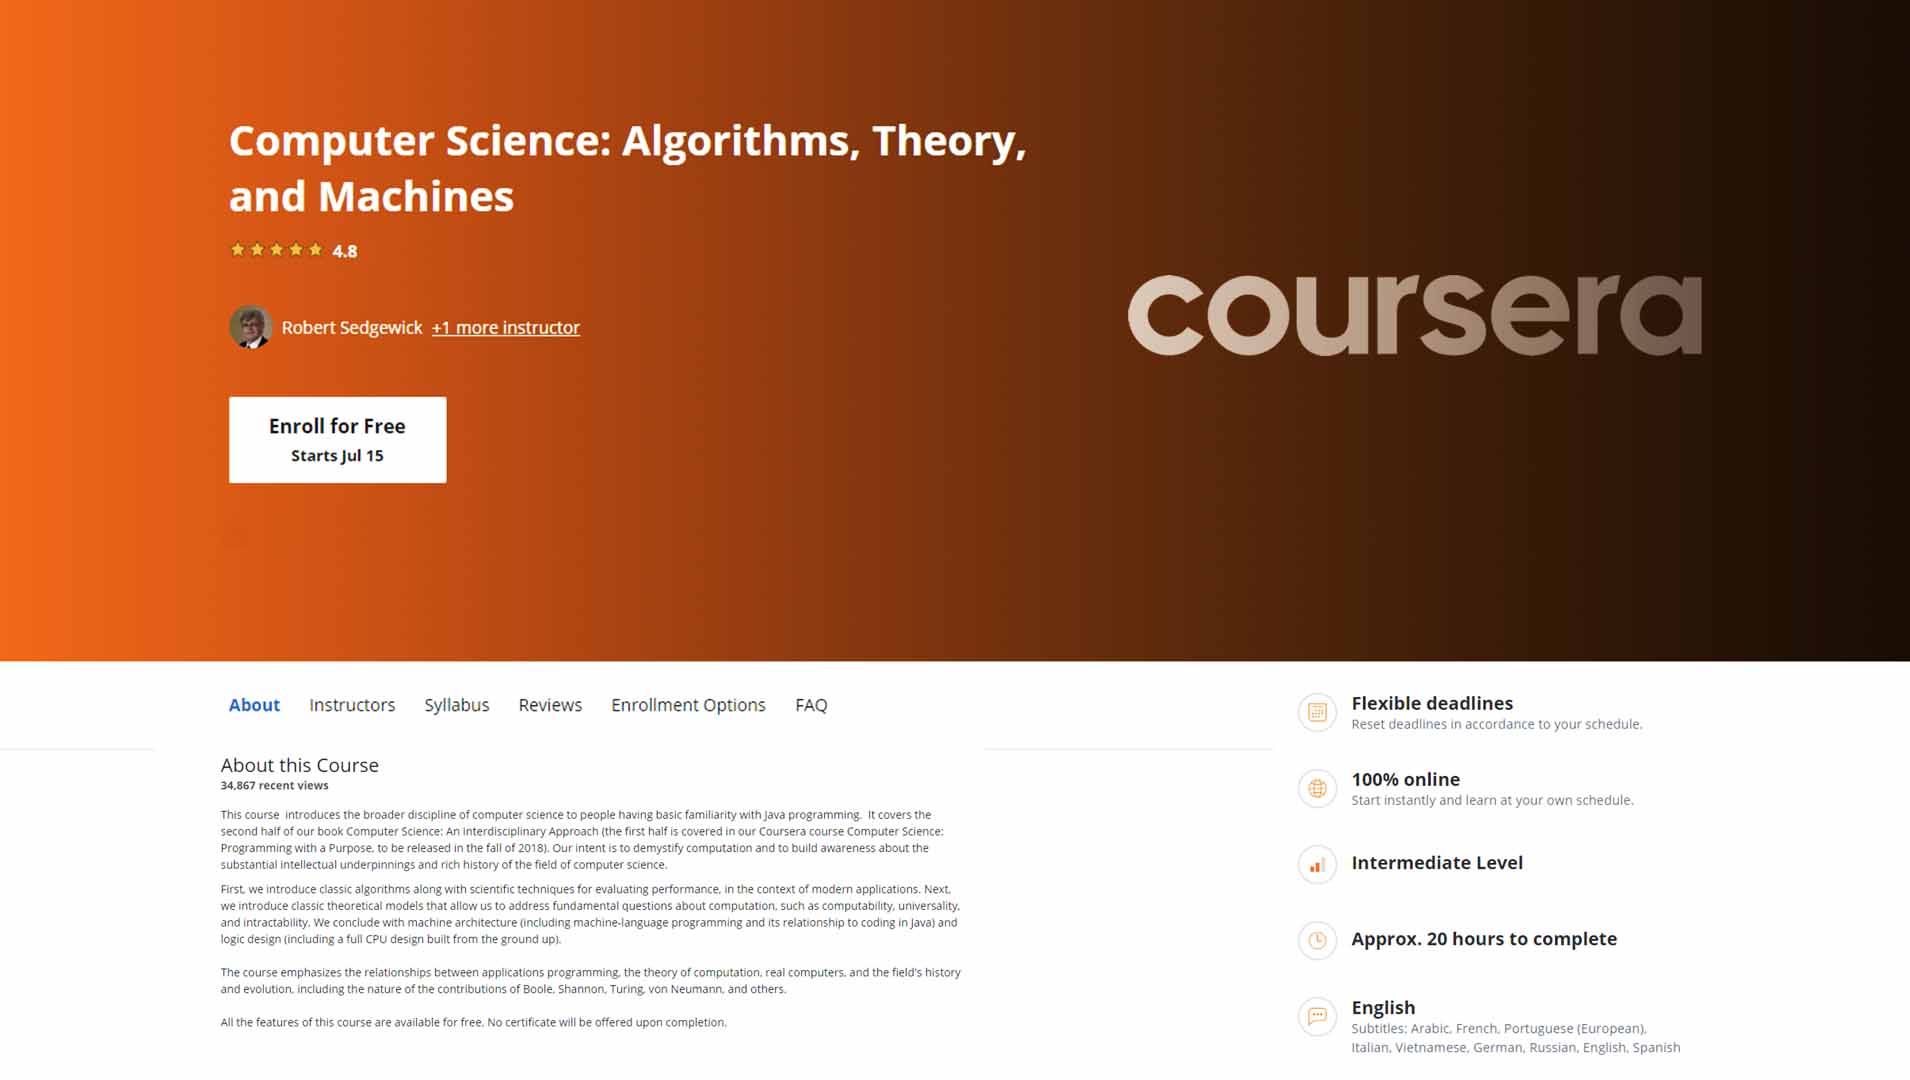 Computer Science: Algorithms, Theory, and Machines